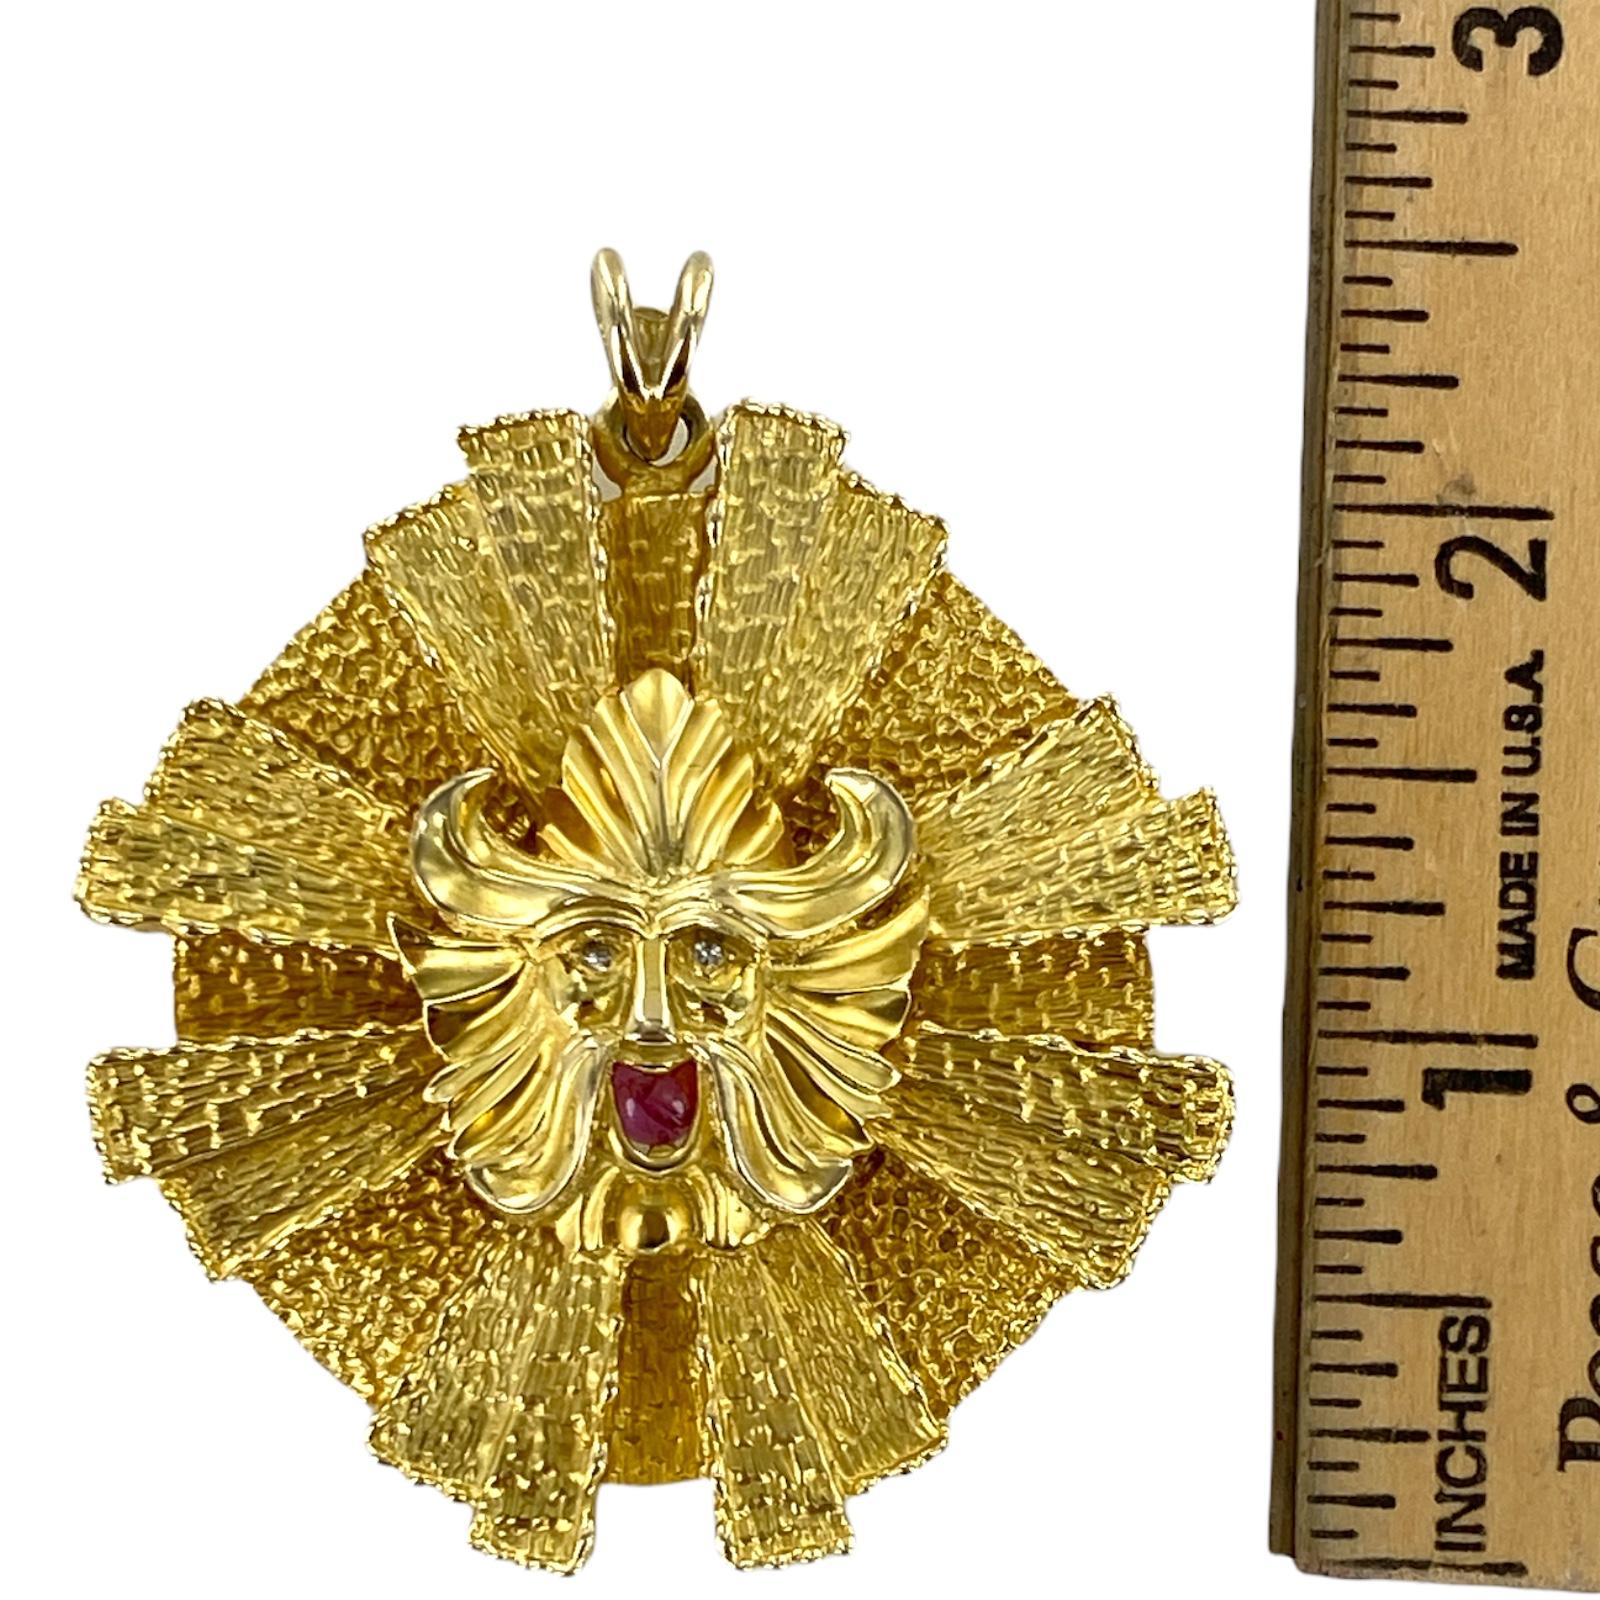 Handcrafted sunburst pendant fashioned in solid 14 karat yellow gold. The textured gold pendant features  a Viking with 2 diamond eyes and a cabochon ruby mouth. The pendant measures 2.25 inches in diameter. 